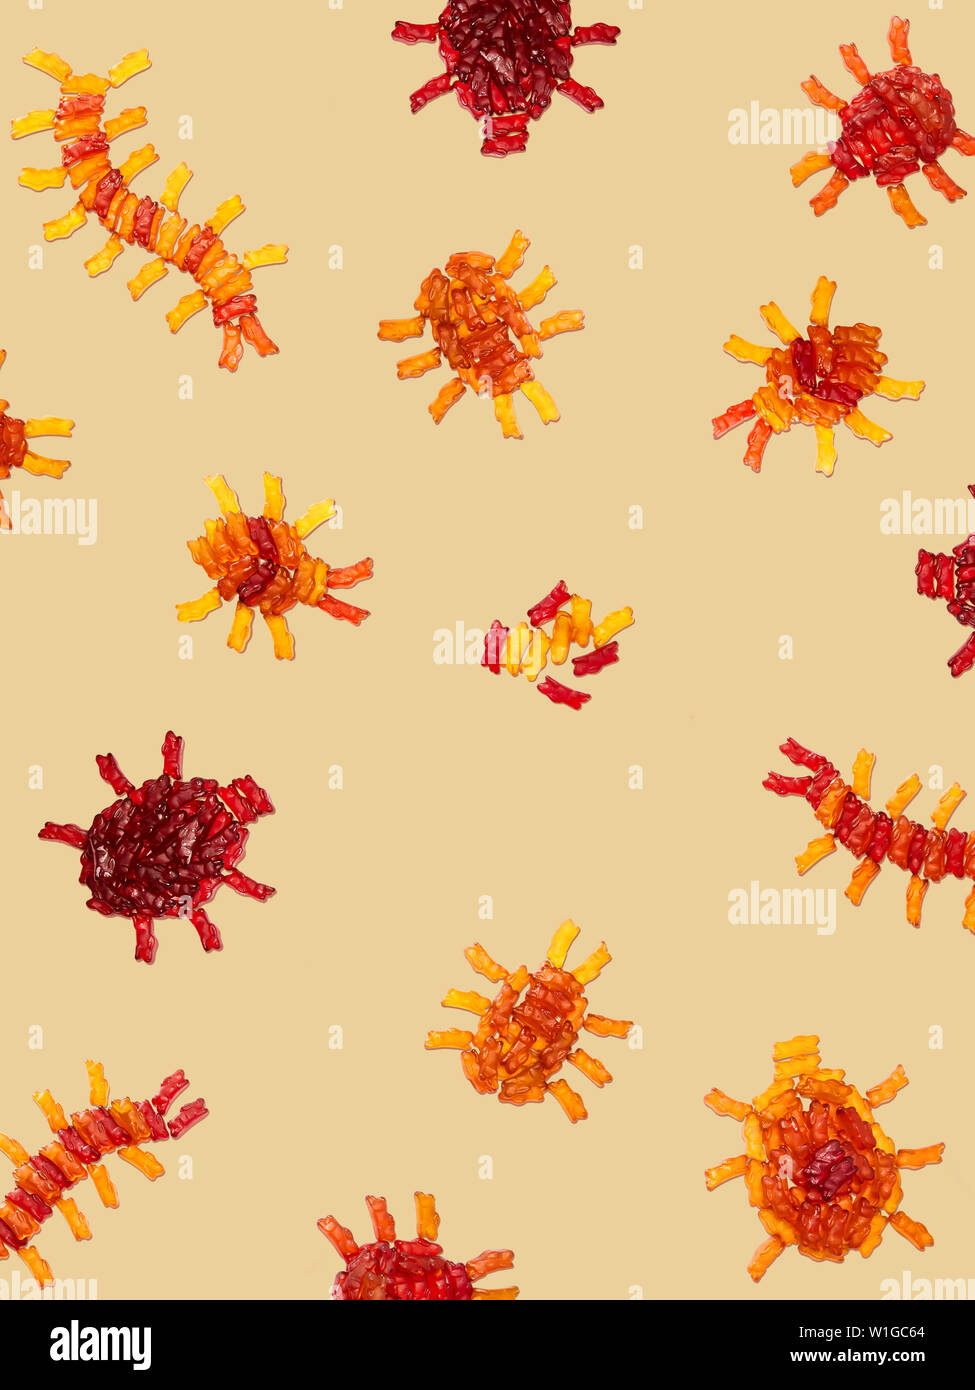 bugs and spiders made from fruit snacks Stock Photo